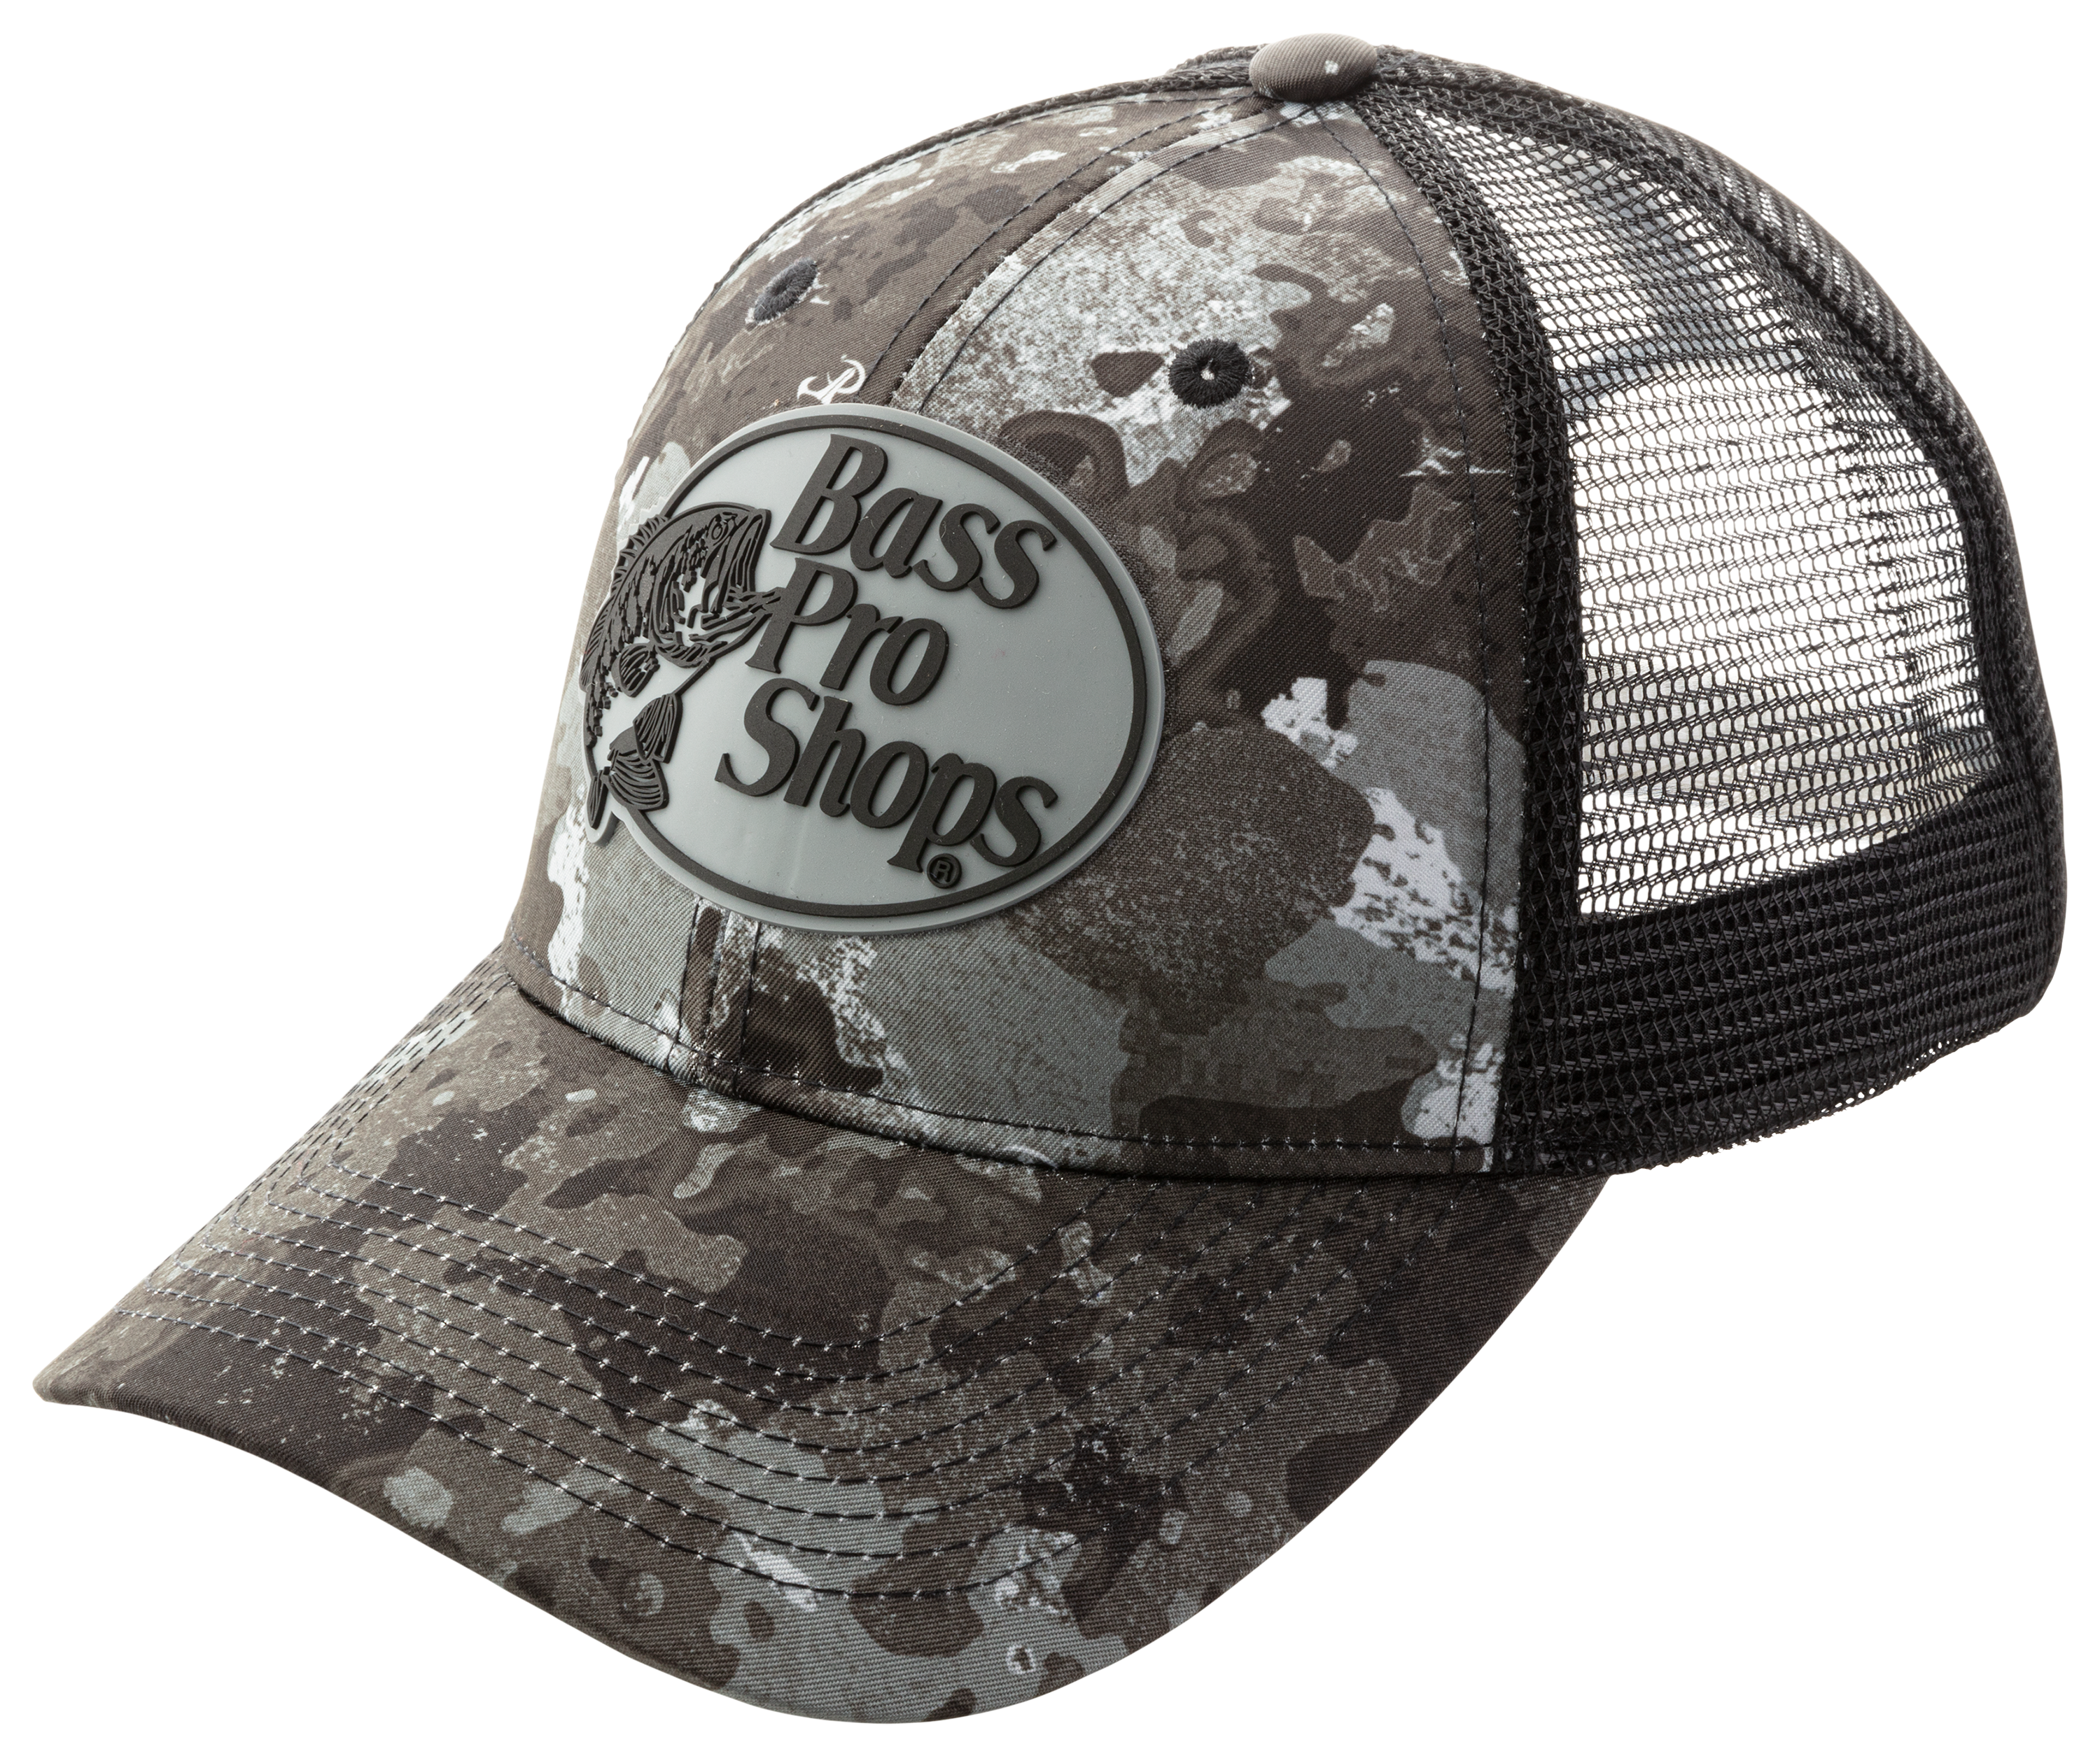 Avid Outdoorsman Spends All Day Indoors Wearing Bass Pro Shops Cap